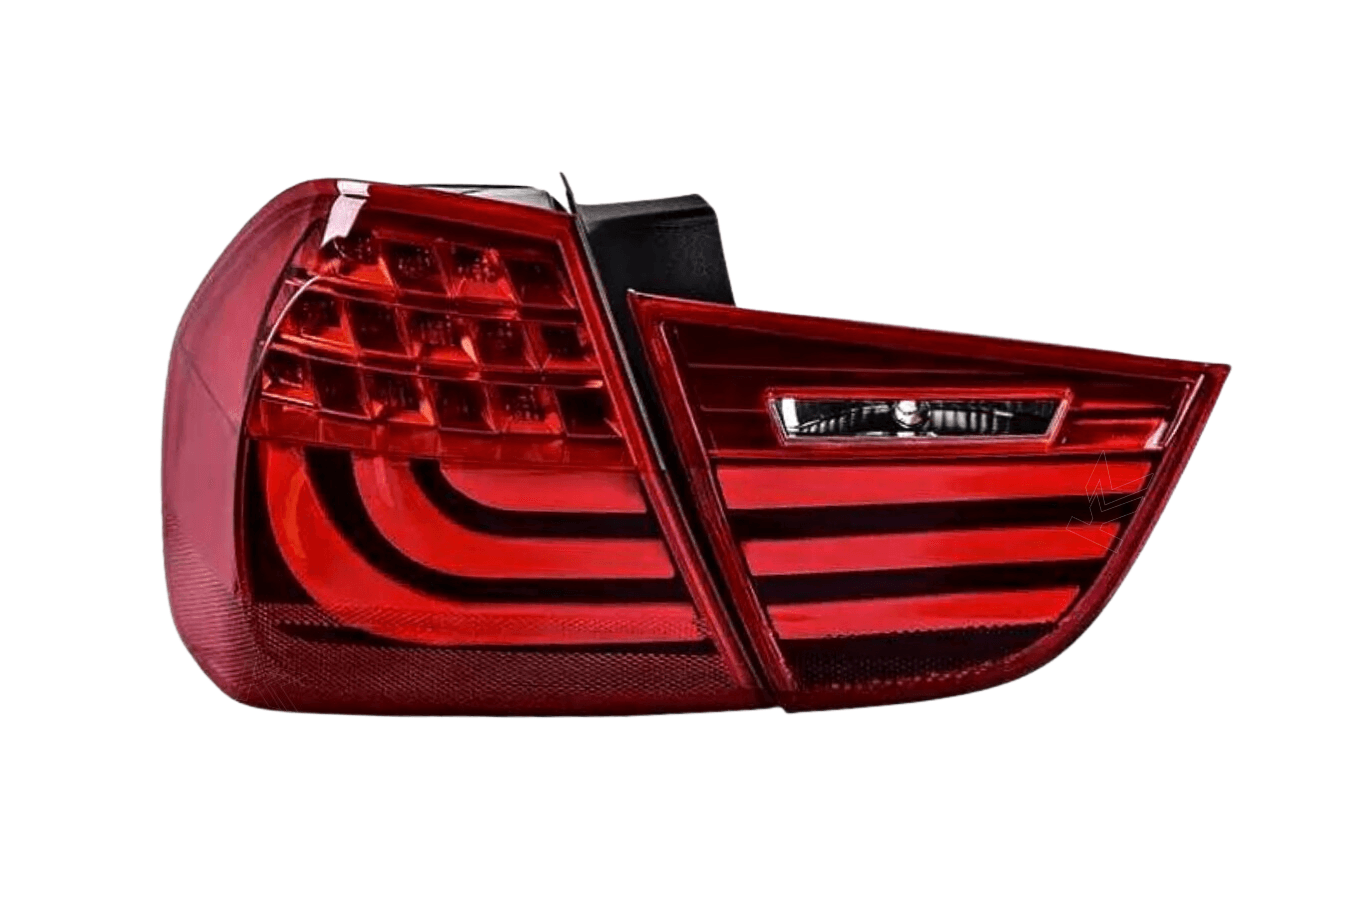 BMW 3 Series E90 Upgraded LED Tail Light Assembly 2009-2012 - K2 Industries